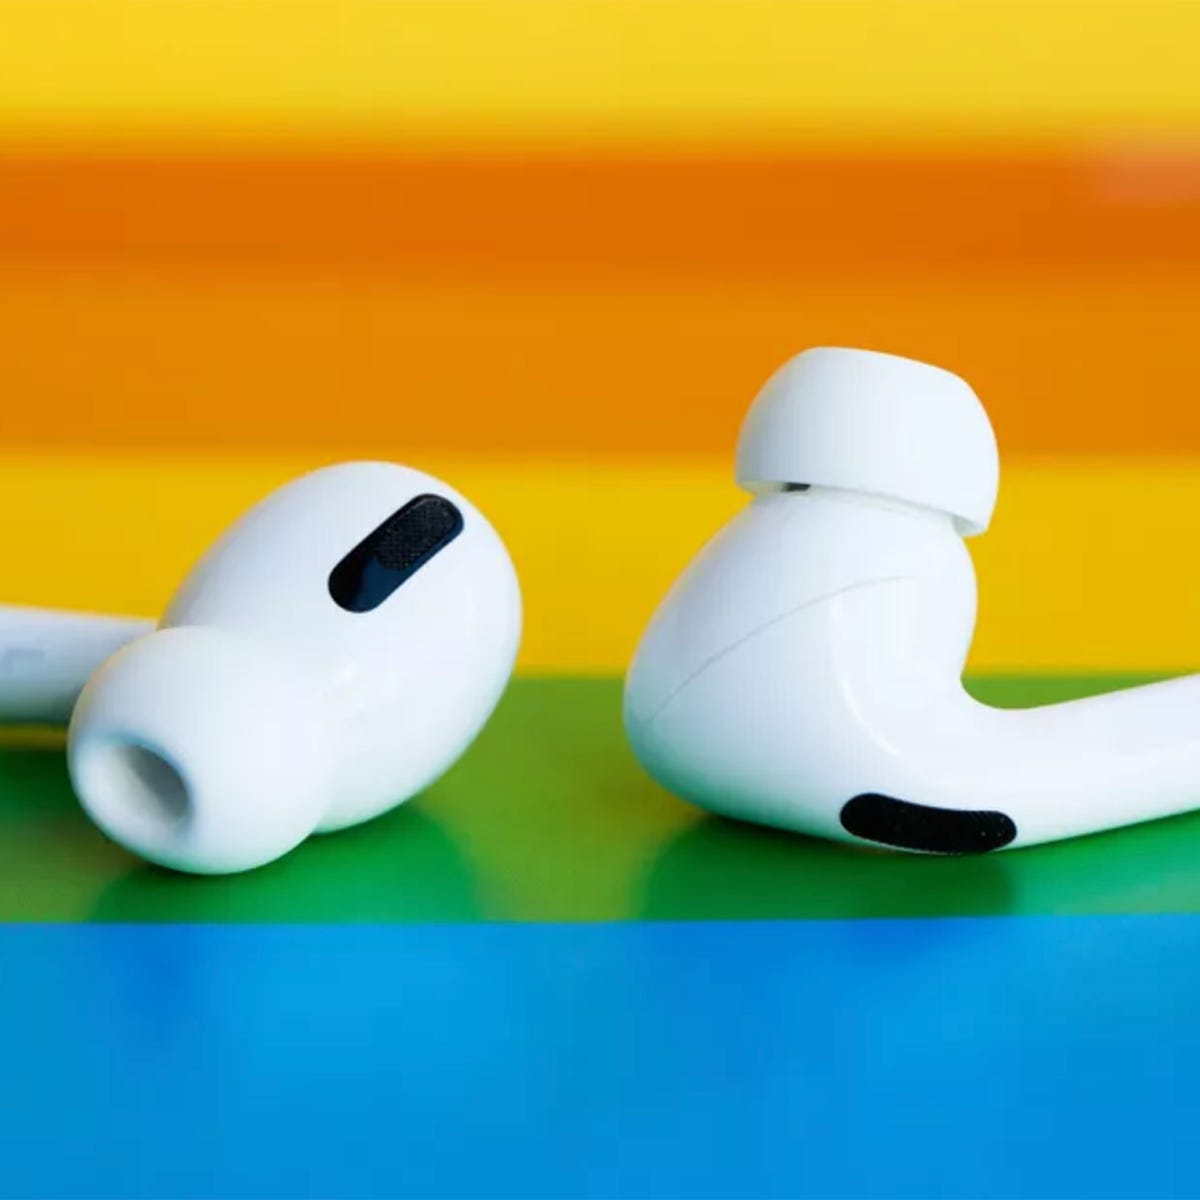 Last Minute Deal Woot Is Selling 179 Apple Airpods Pro Until Midnight Update Expired Zdnet